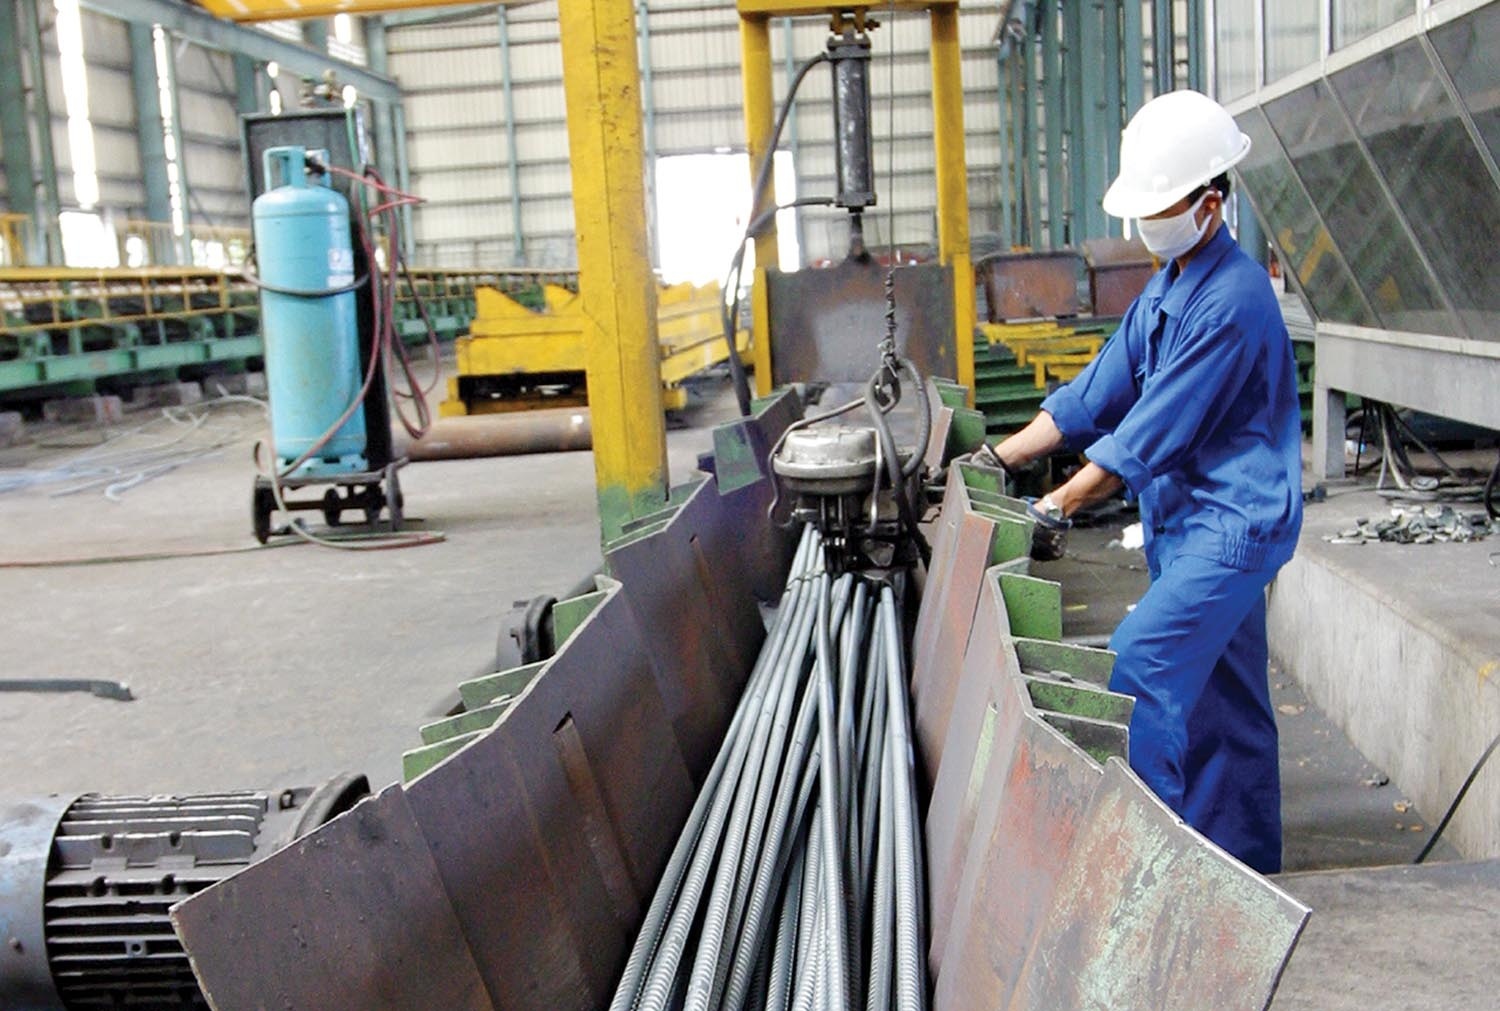 Rosier price prospects for steel products set for Q4